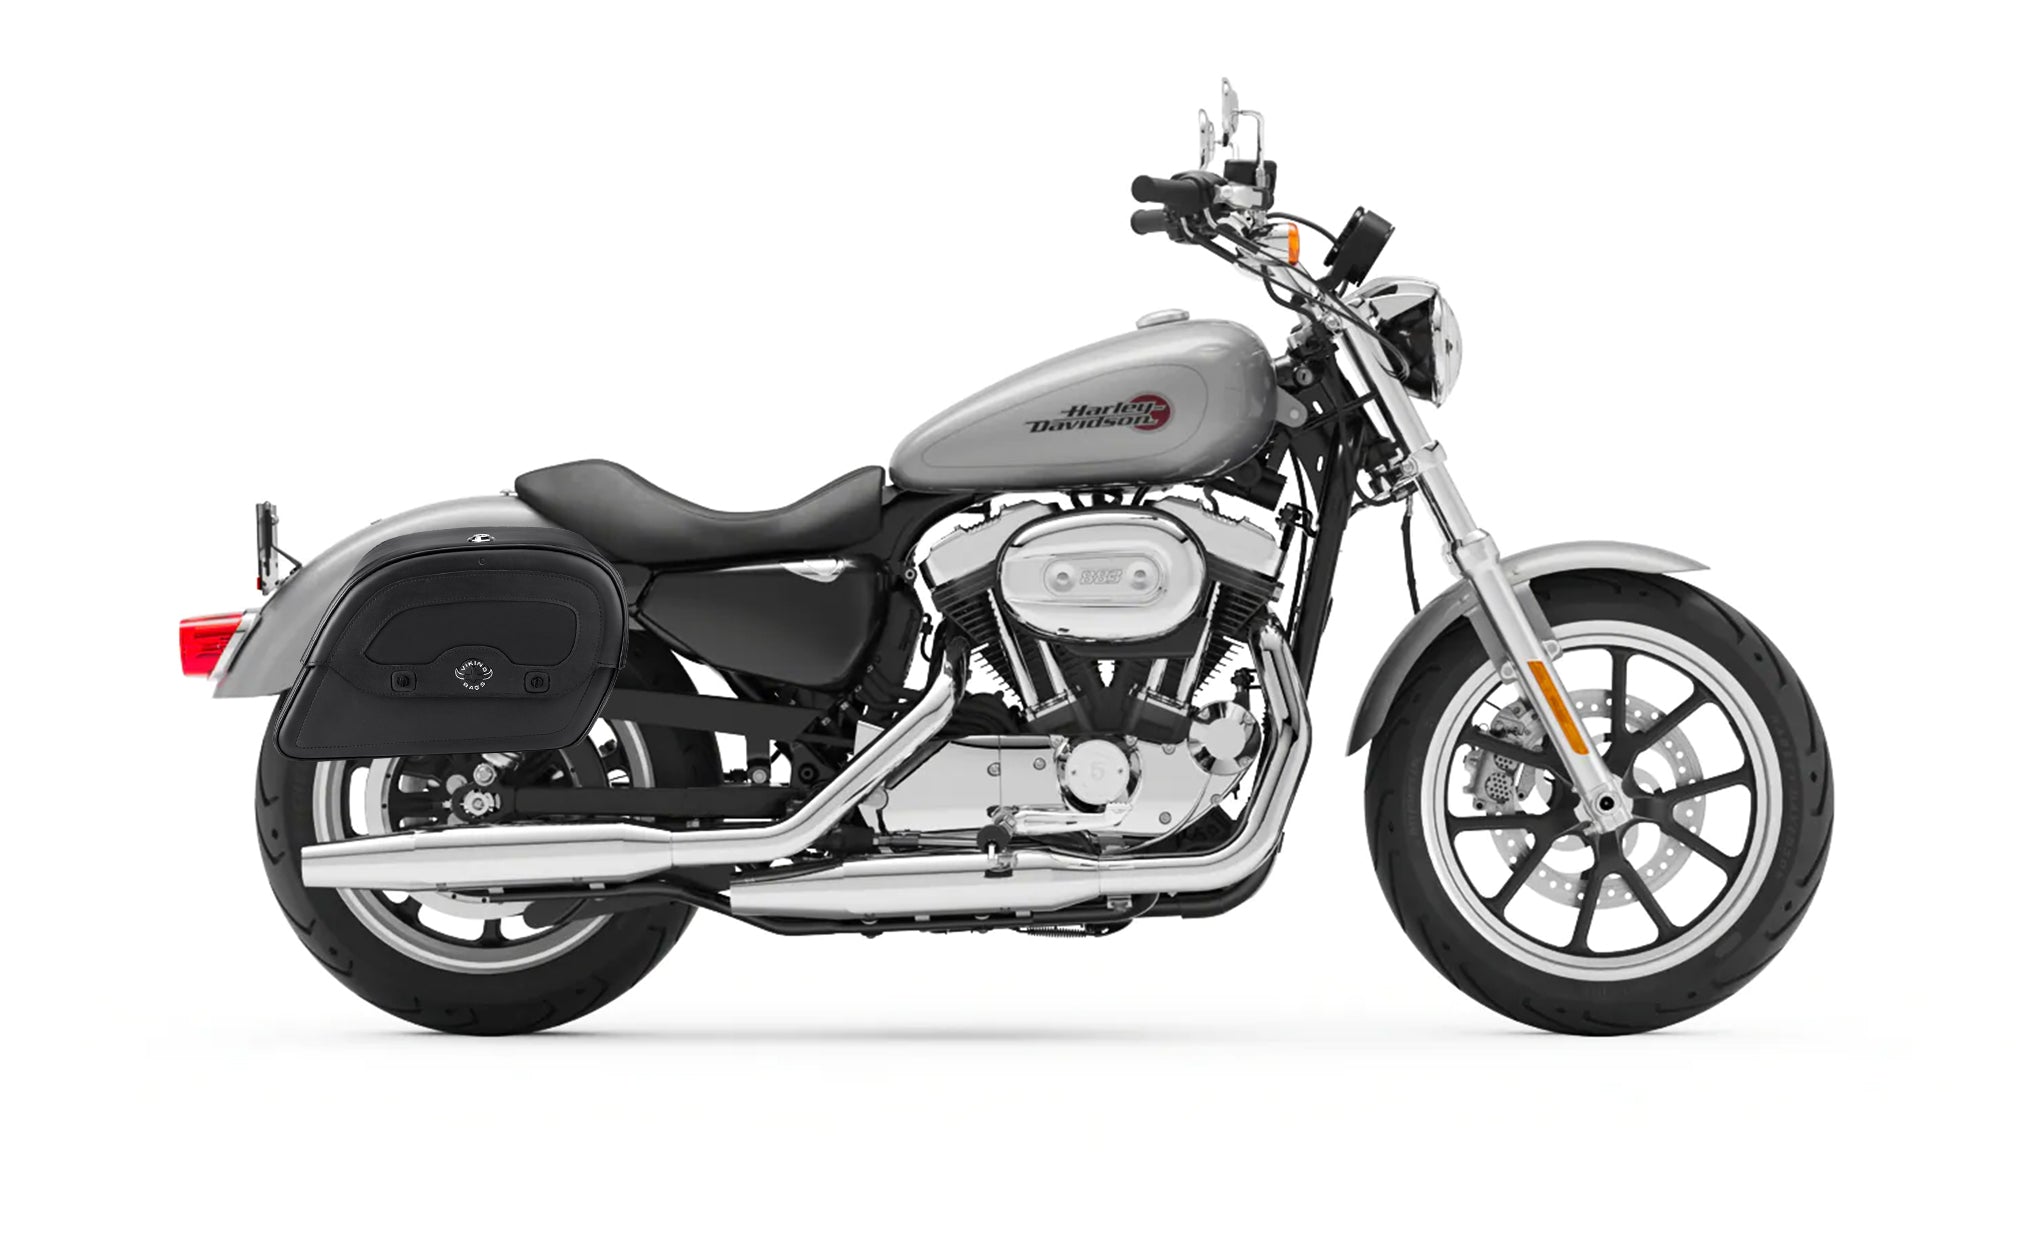 28L - Warrior Medium Quick-Mount Motorcycle Saddlebags For Harley Sportster Superlow @expand